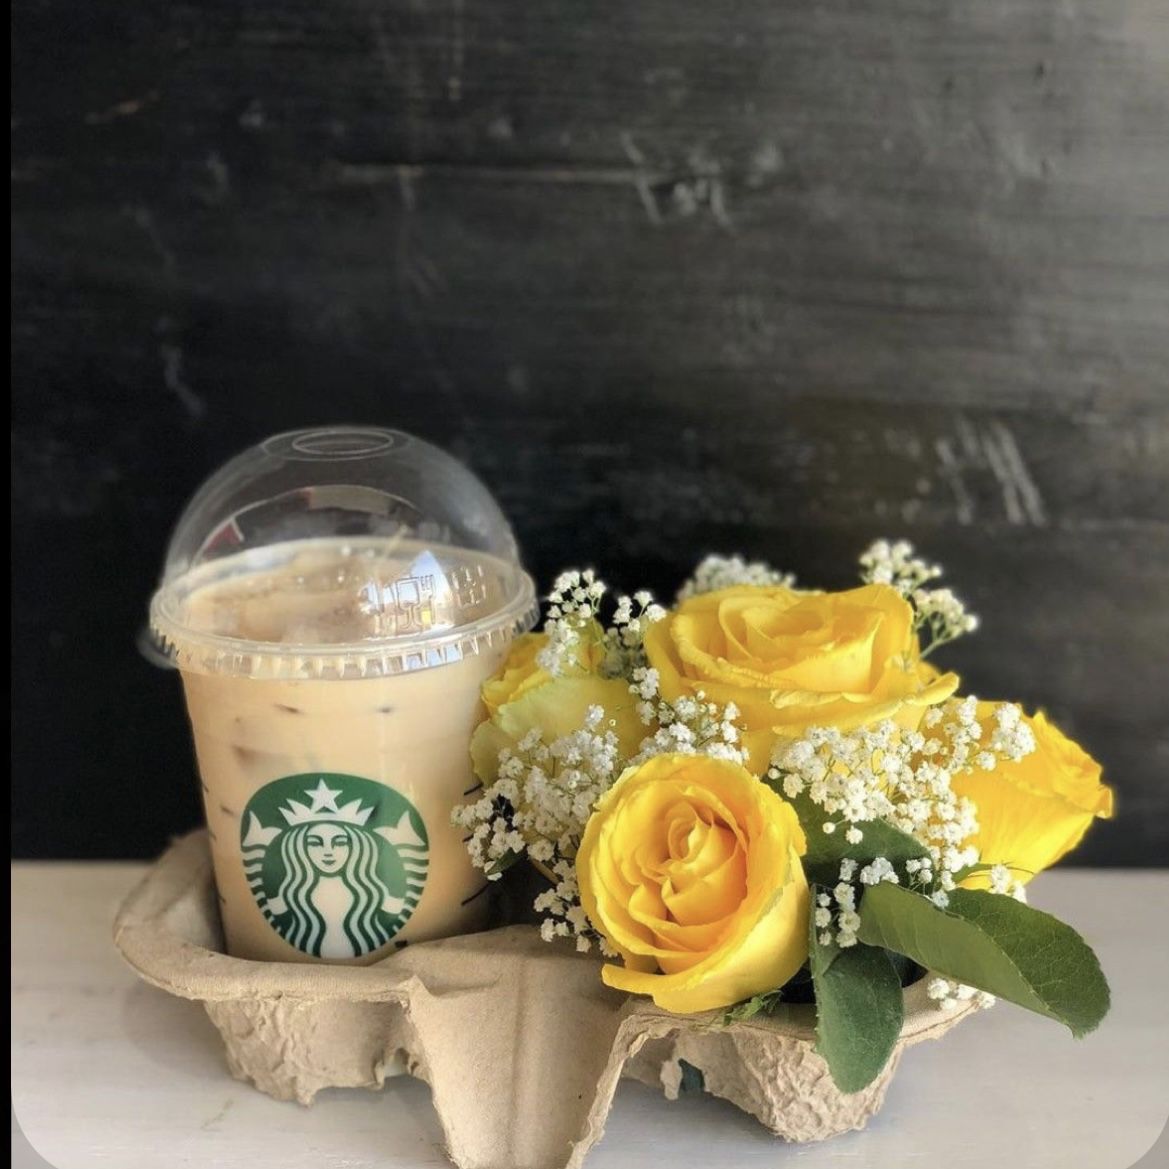 Rose Gold Starbucks Tumbler for Sale in Ceres, CA - OfferUp